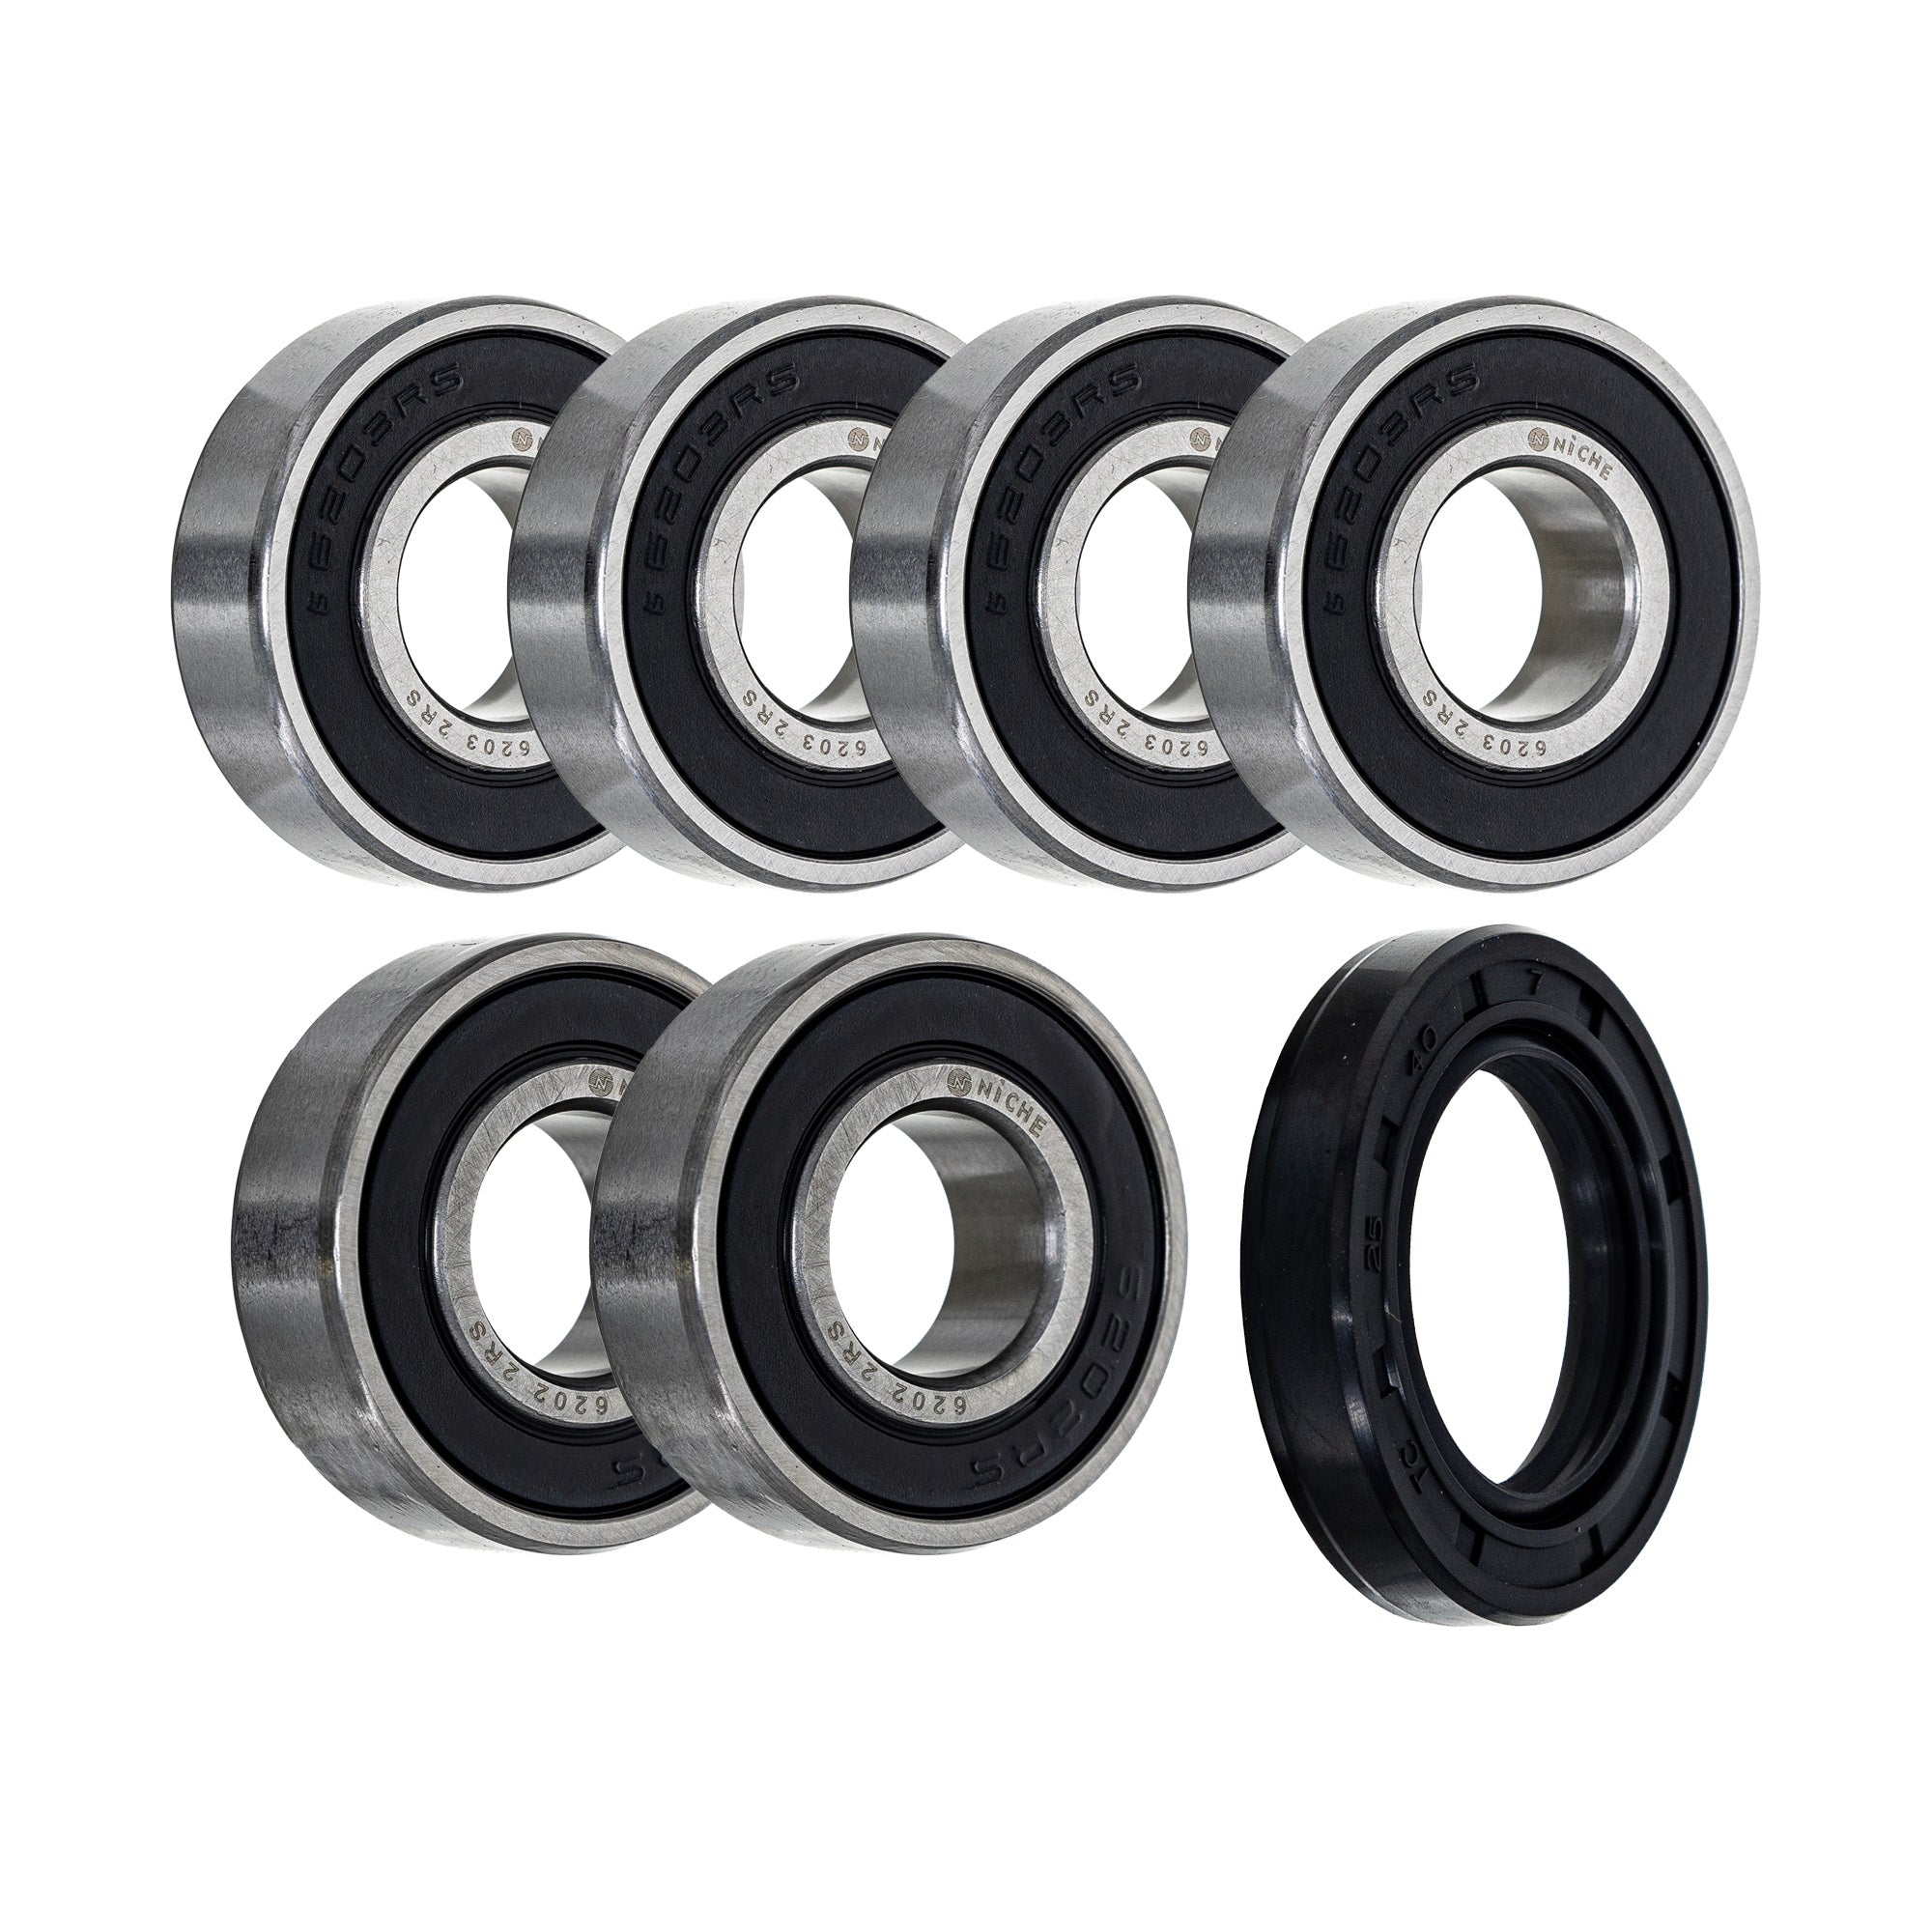 Wheel Bearing Seal Kit for zOTHER Ref No IT250 NICHE MK1008715